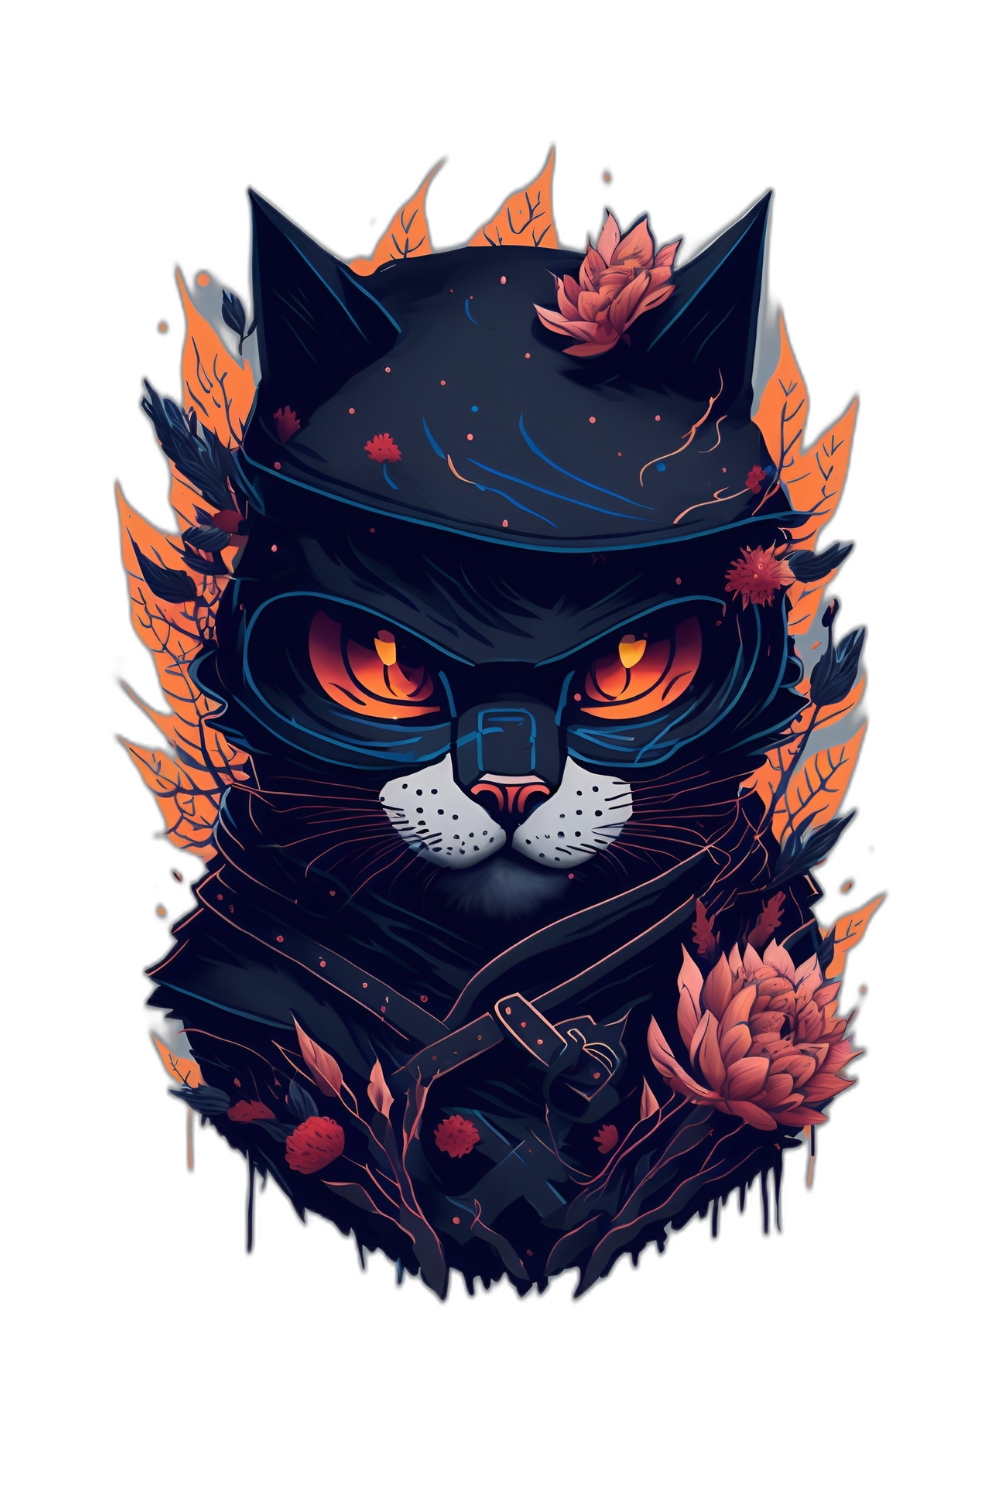 Angry cat with flower splash 4k design for T-Shirts , logos , illustrations etc pinterest preview image.